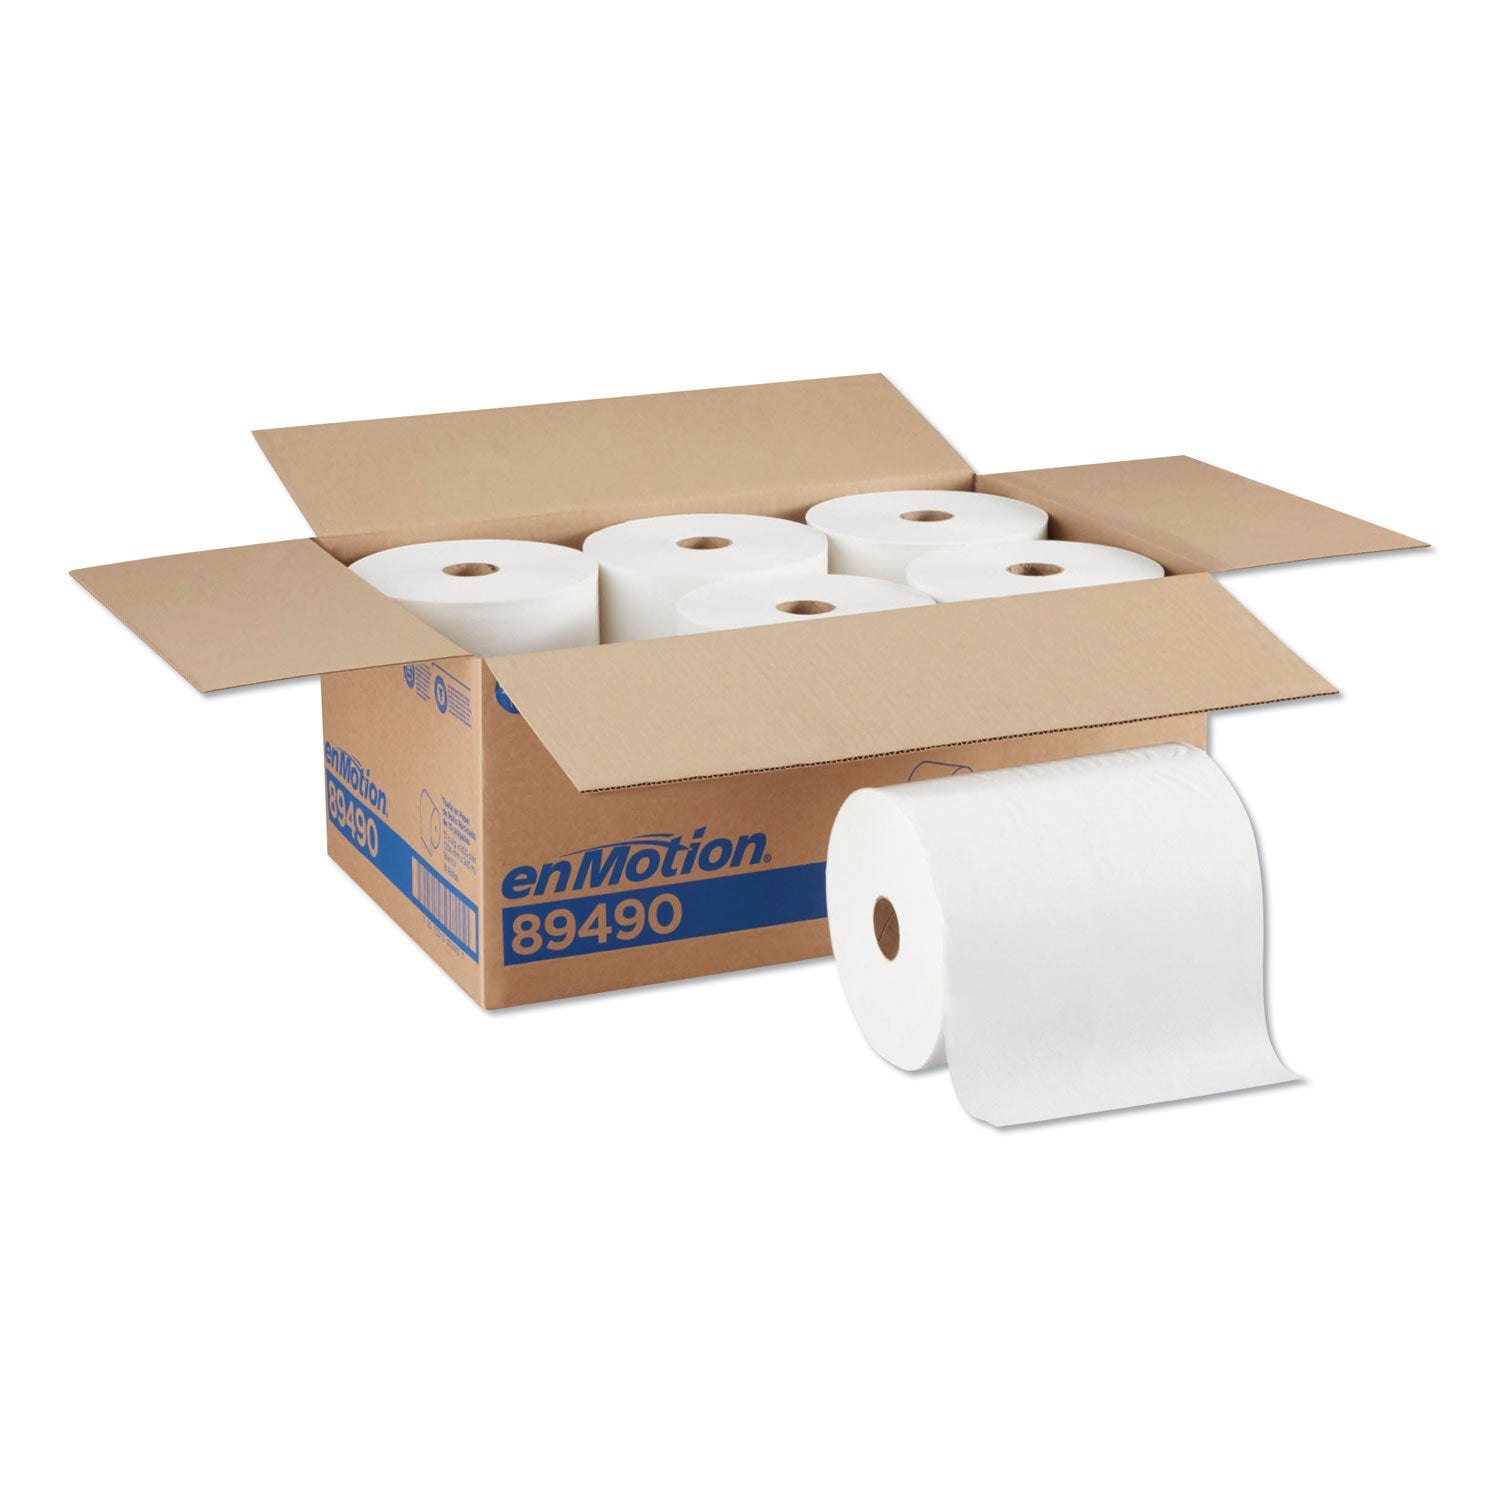 enMotion Paper Towel Rolls, 10" x 800', 40% Recycled, White, Pack Of 6 Rolls - 1 Ply - 10" x 800 ft - 1.75" Core - White - Soft, Absorbent, Long Lasting - For Multipurpose - 6 / Carton - 1